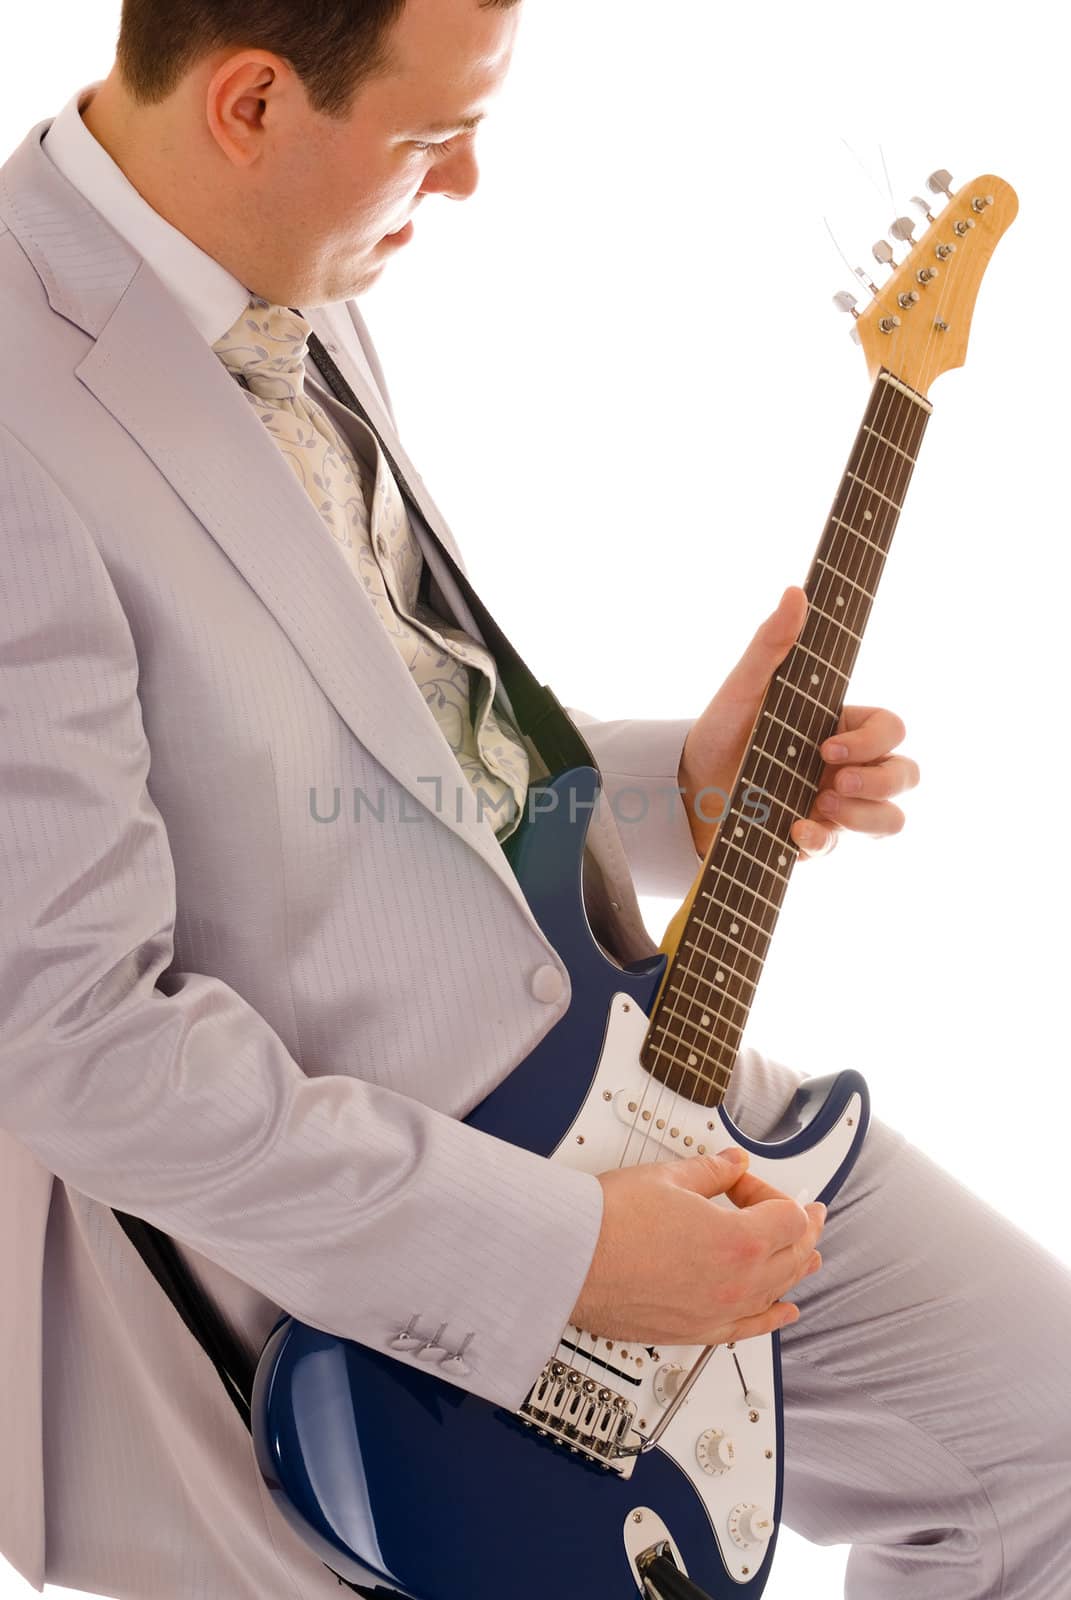 man in white suit playing guitar by petr_malyshev